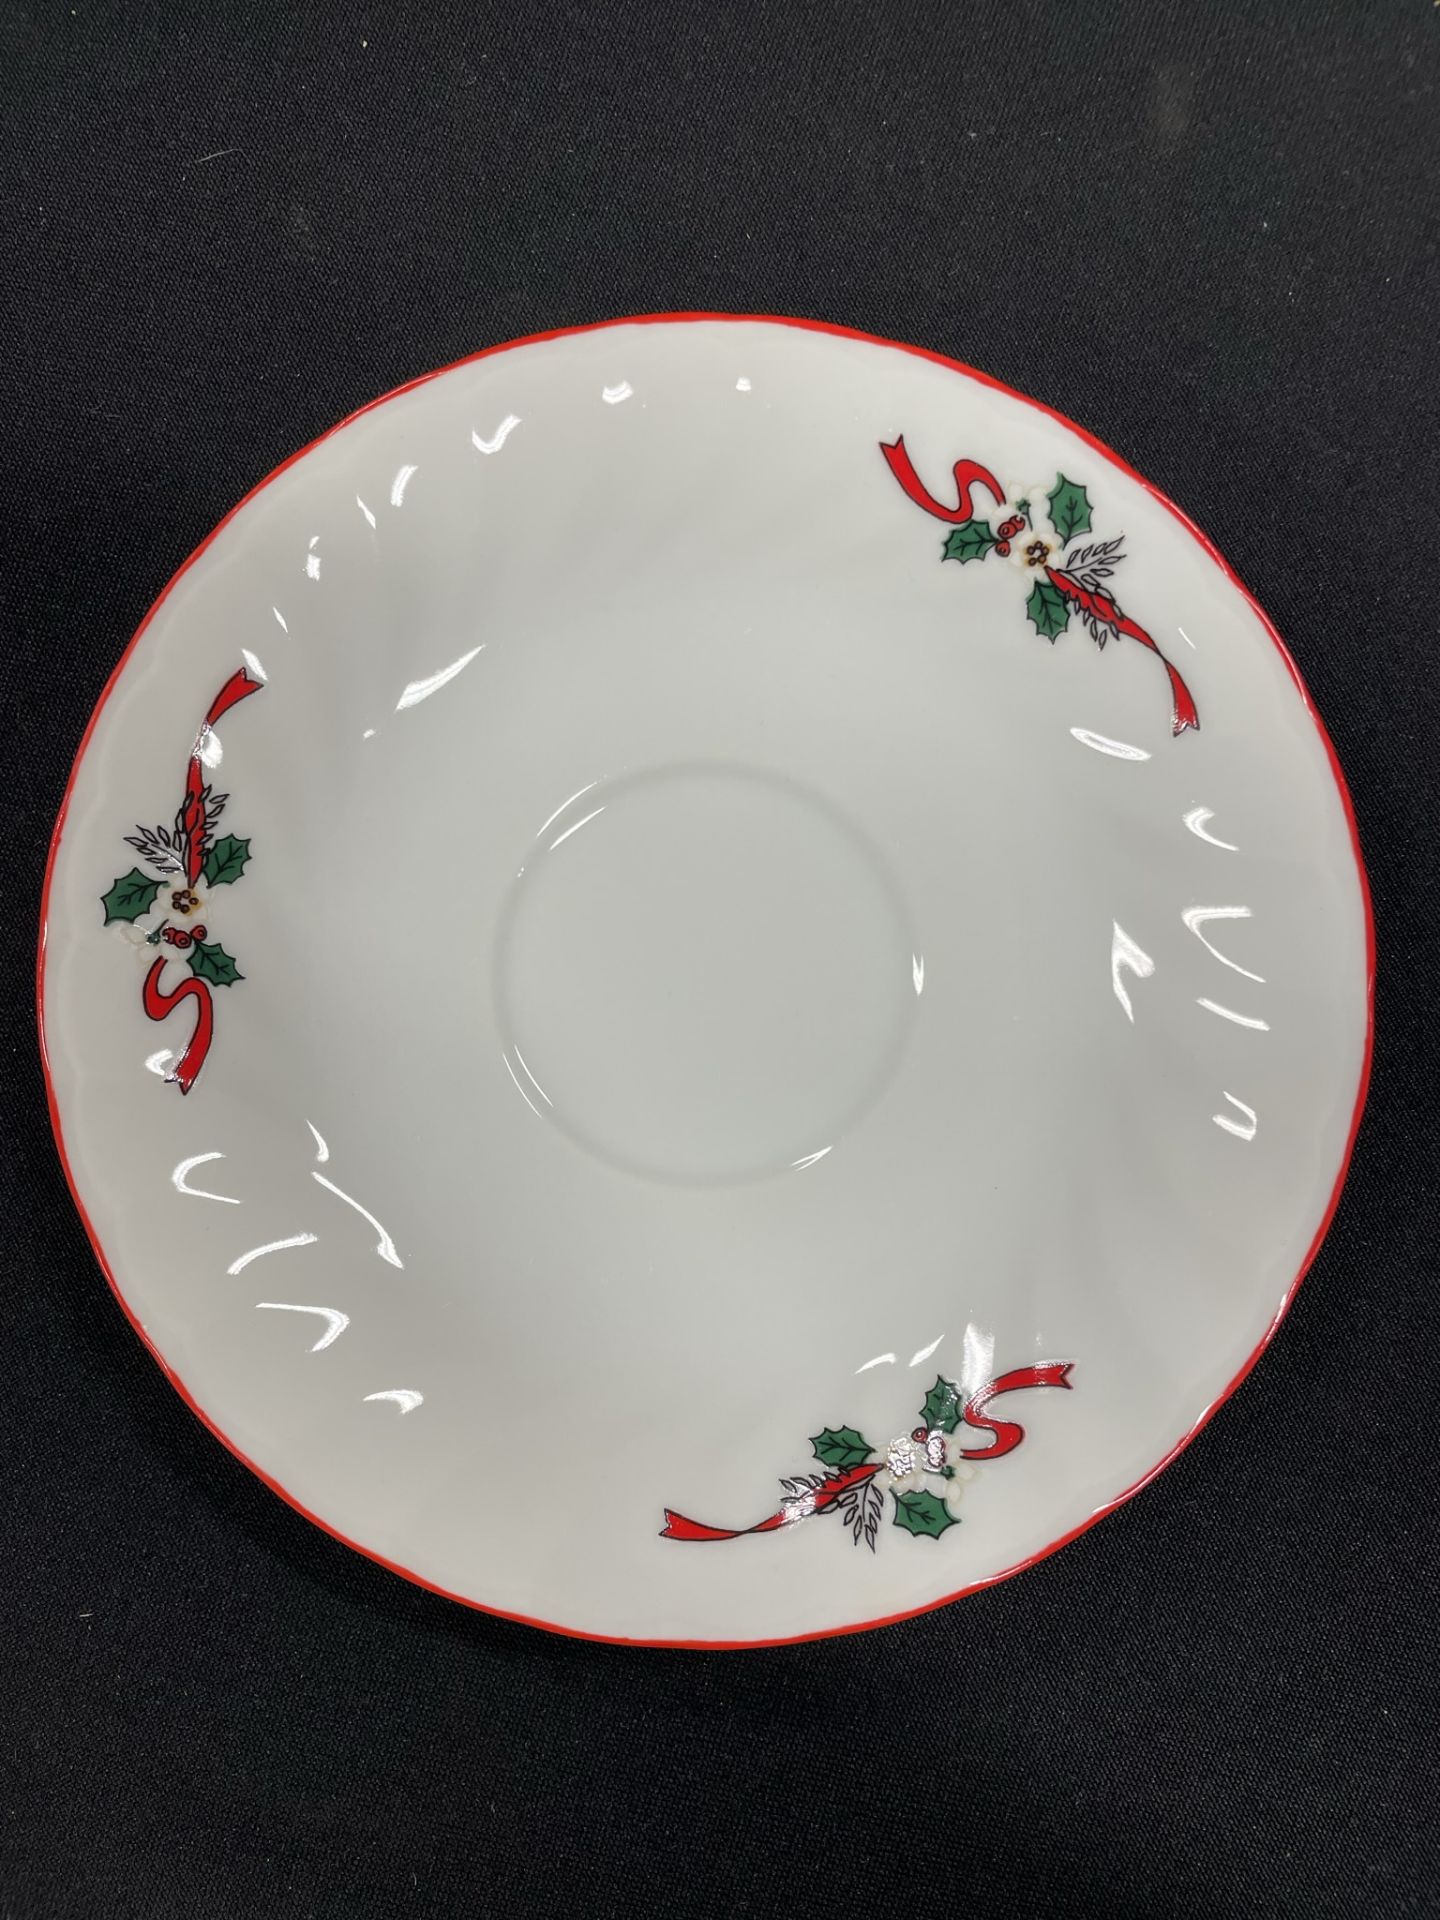 CHRISTMAS THEMED DISHES, TEA CUPS, SAUCERS, BOWLS, ETC. - Image 3 of 3